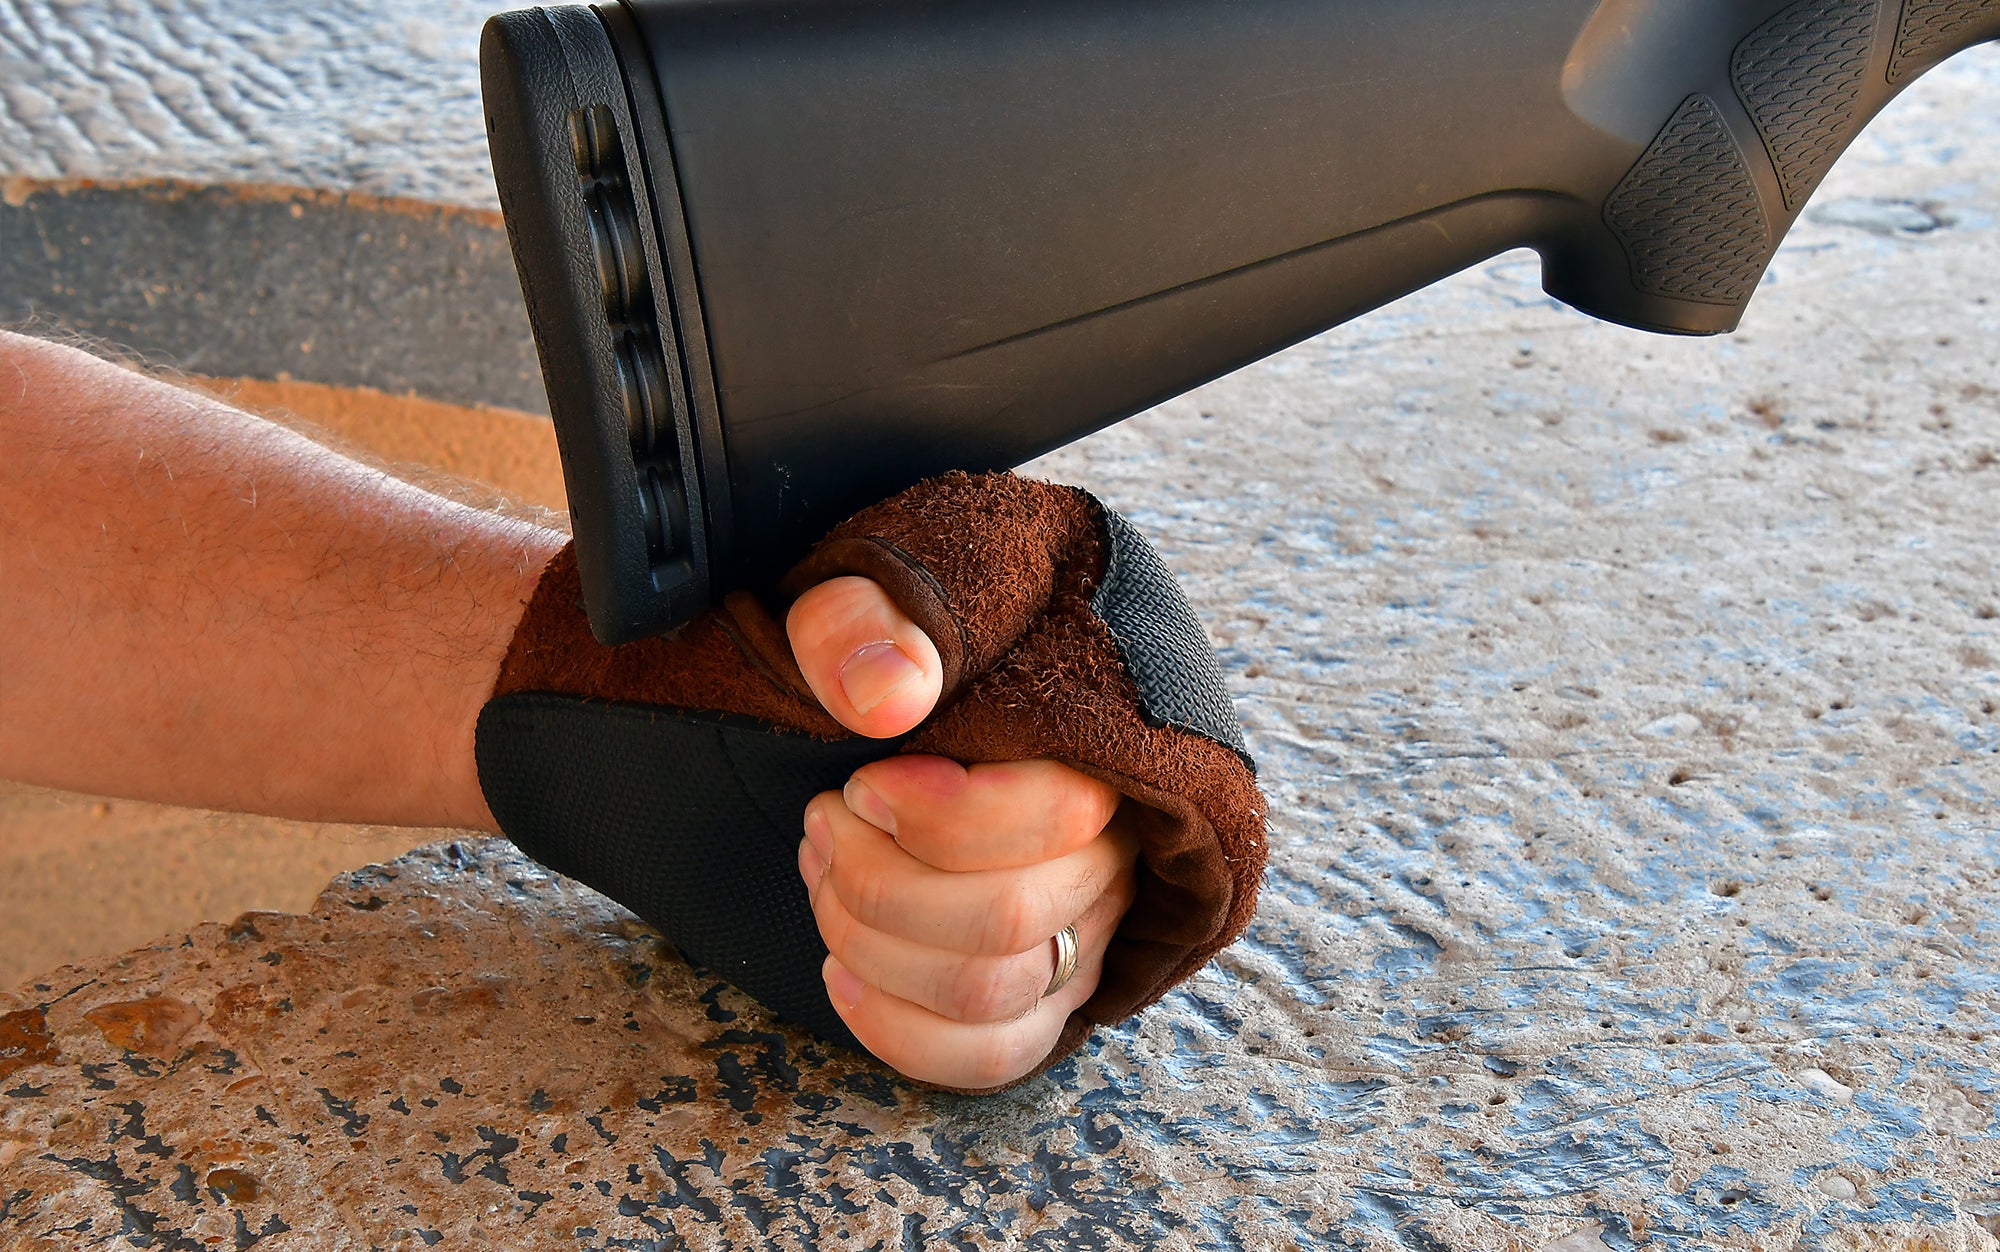 We tested the FTW SAAM Ambidextrous Dog Paw.